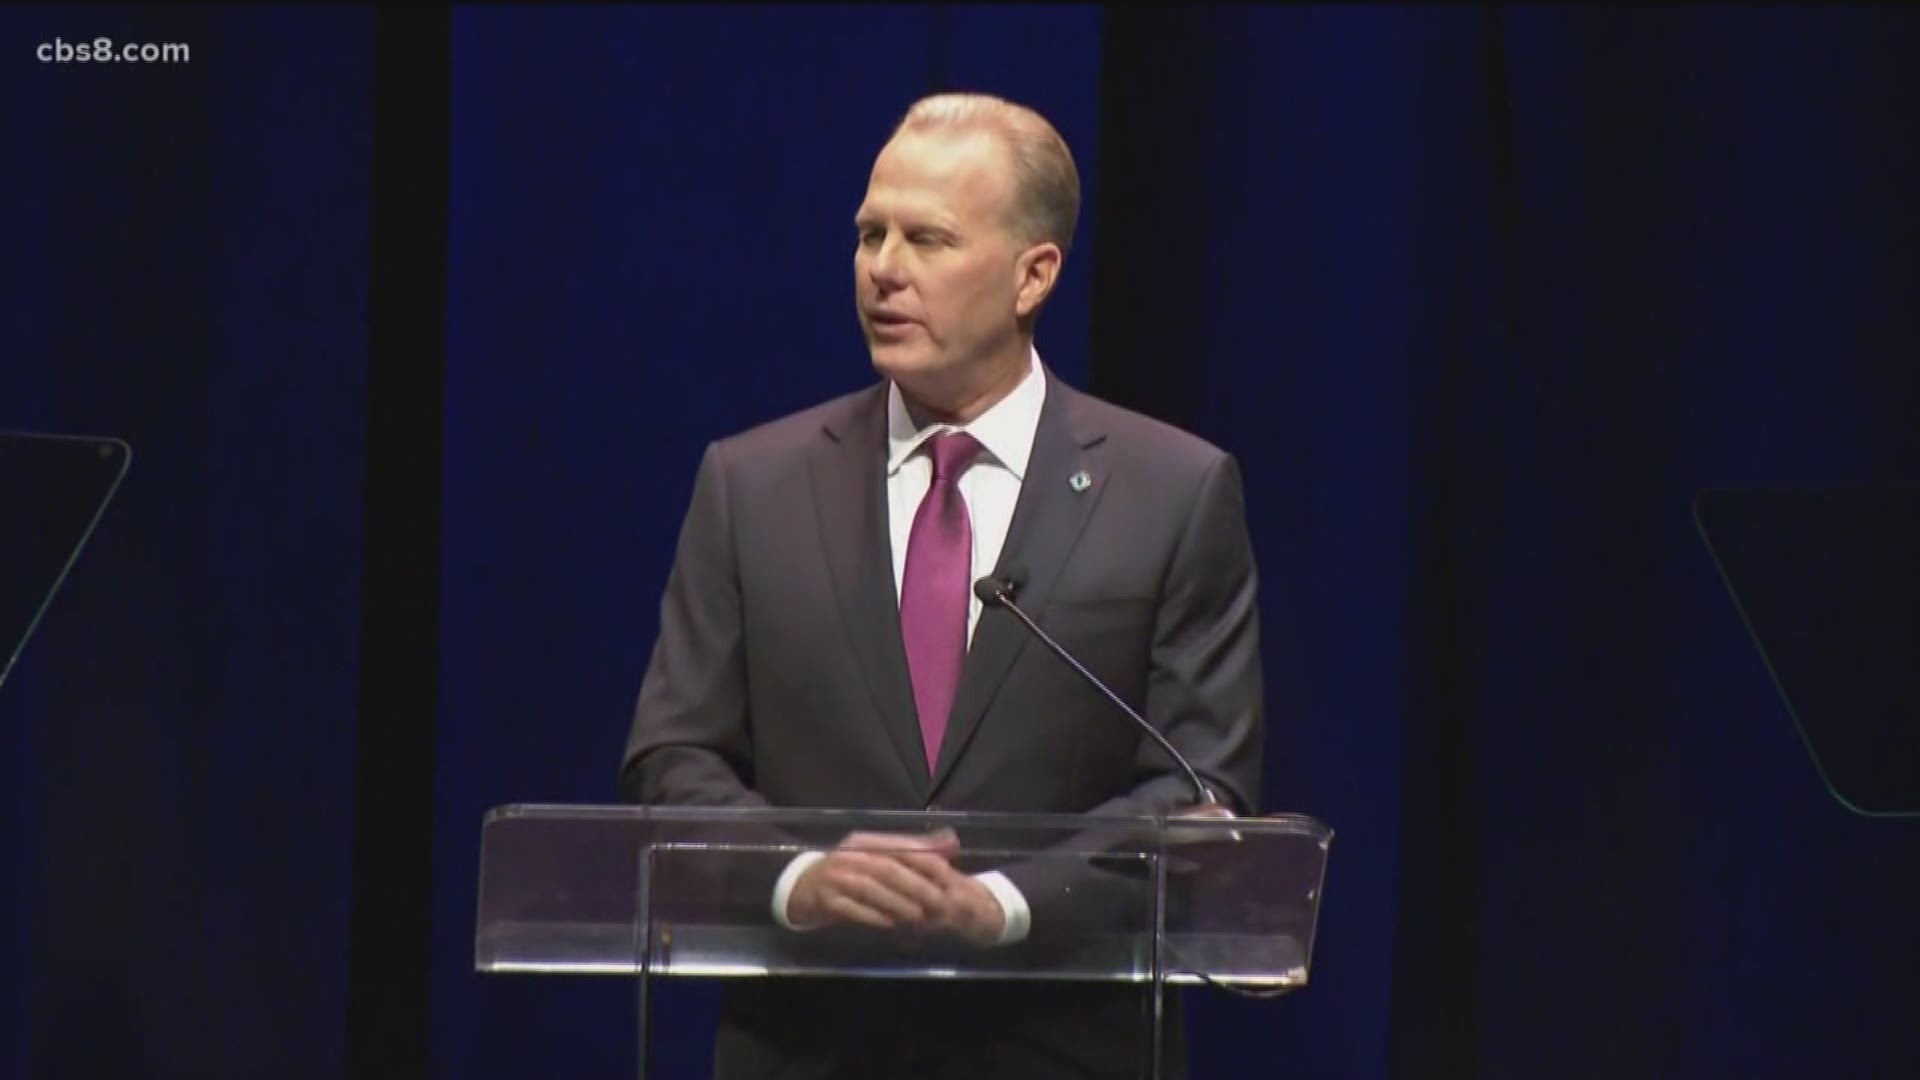 Mayor Faulconer made new promises to the community as he delivered his final State of the City address to mixed crowd.